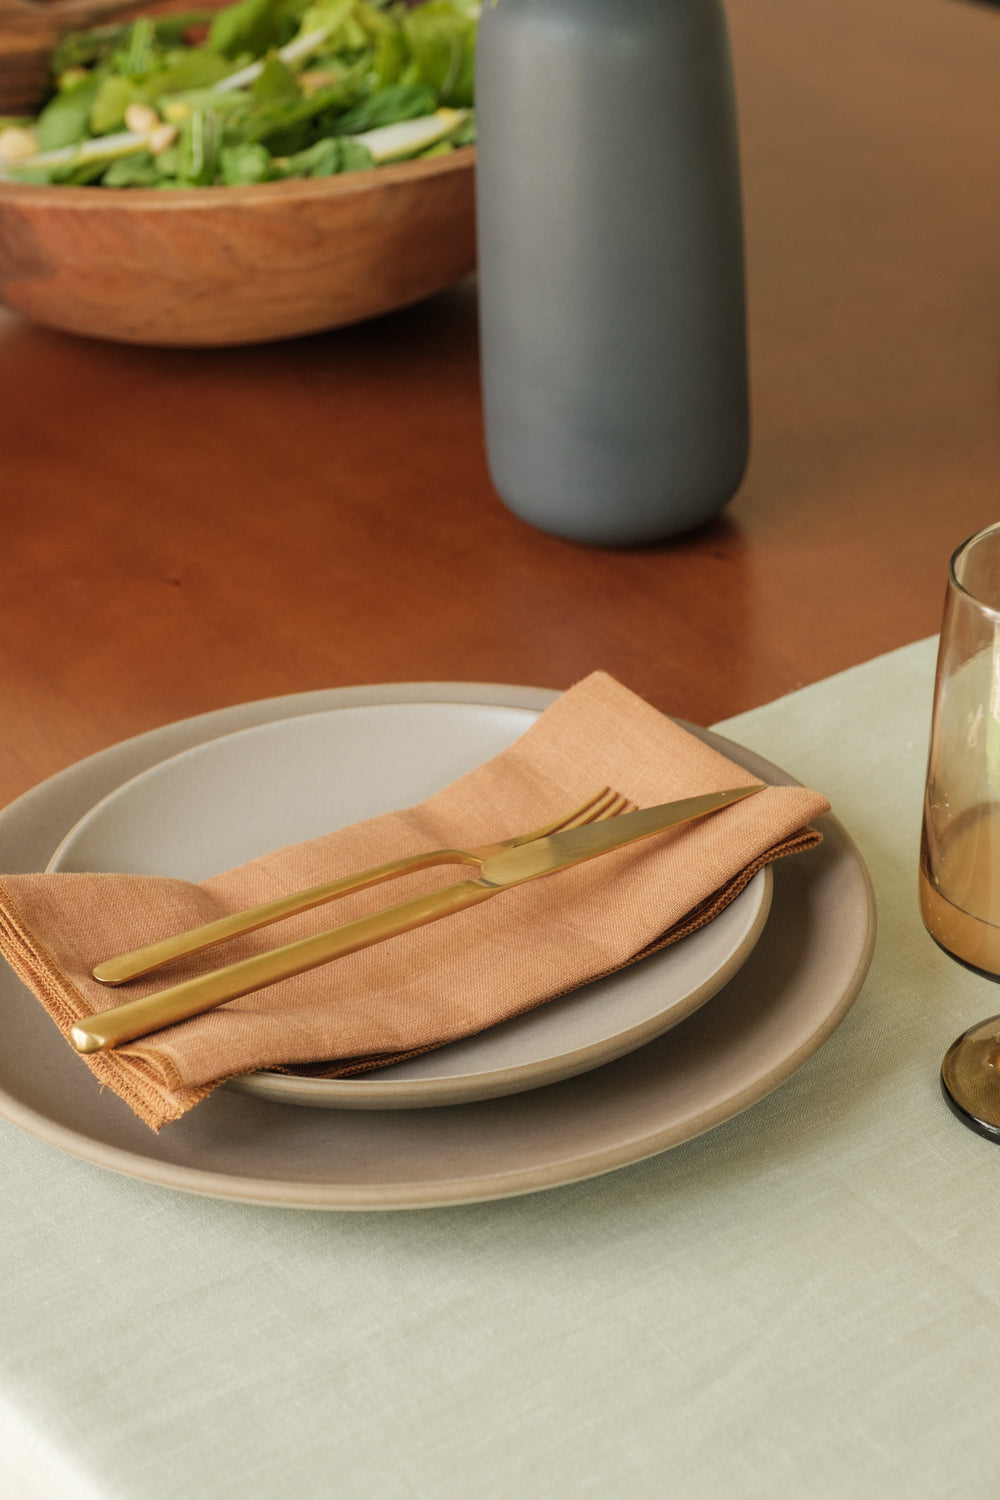 Napkins set of 4 in Tan Linen - Whimsy & Row